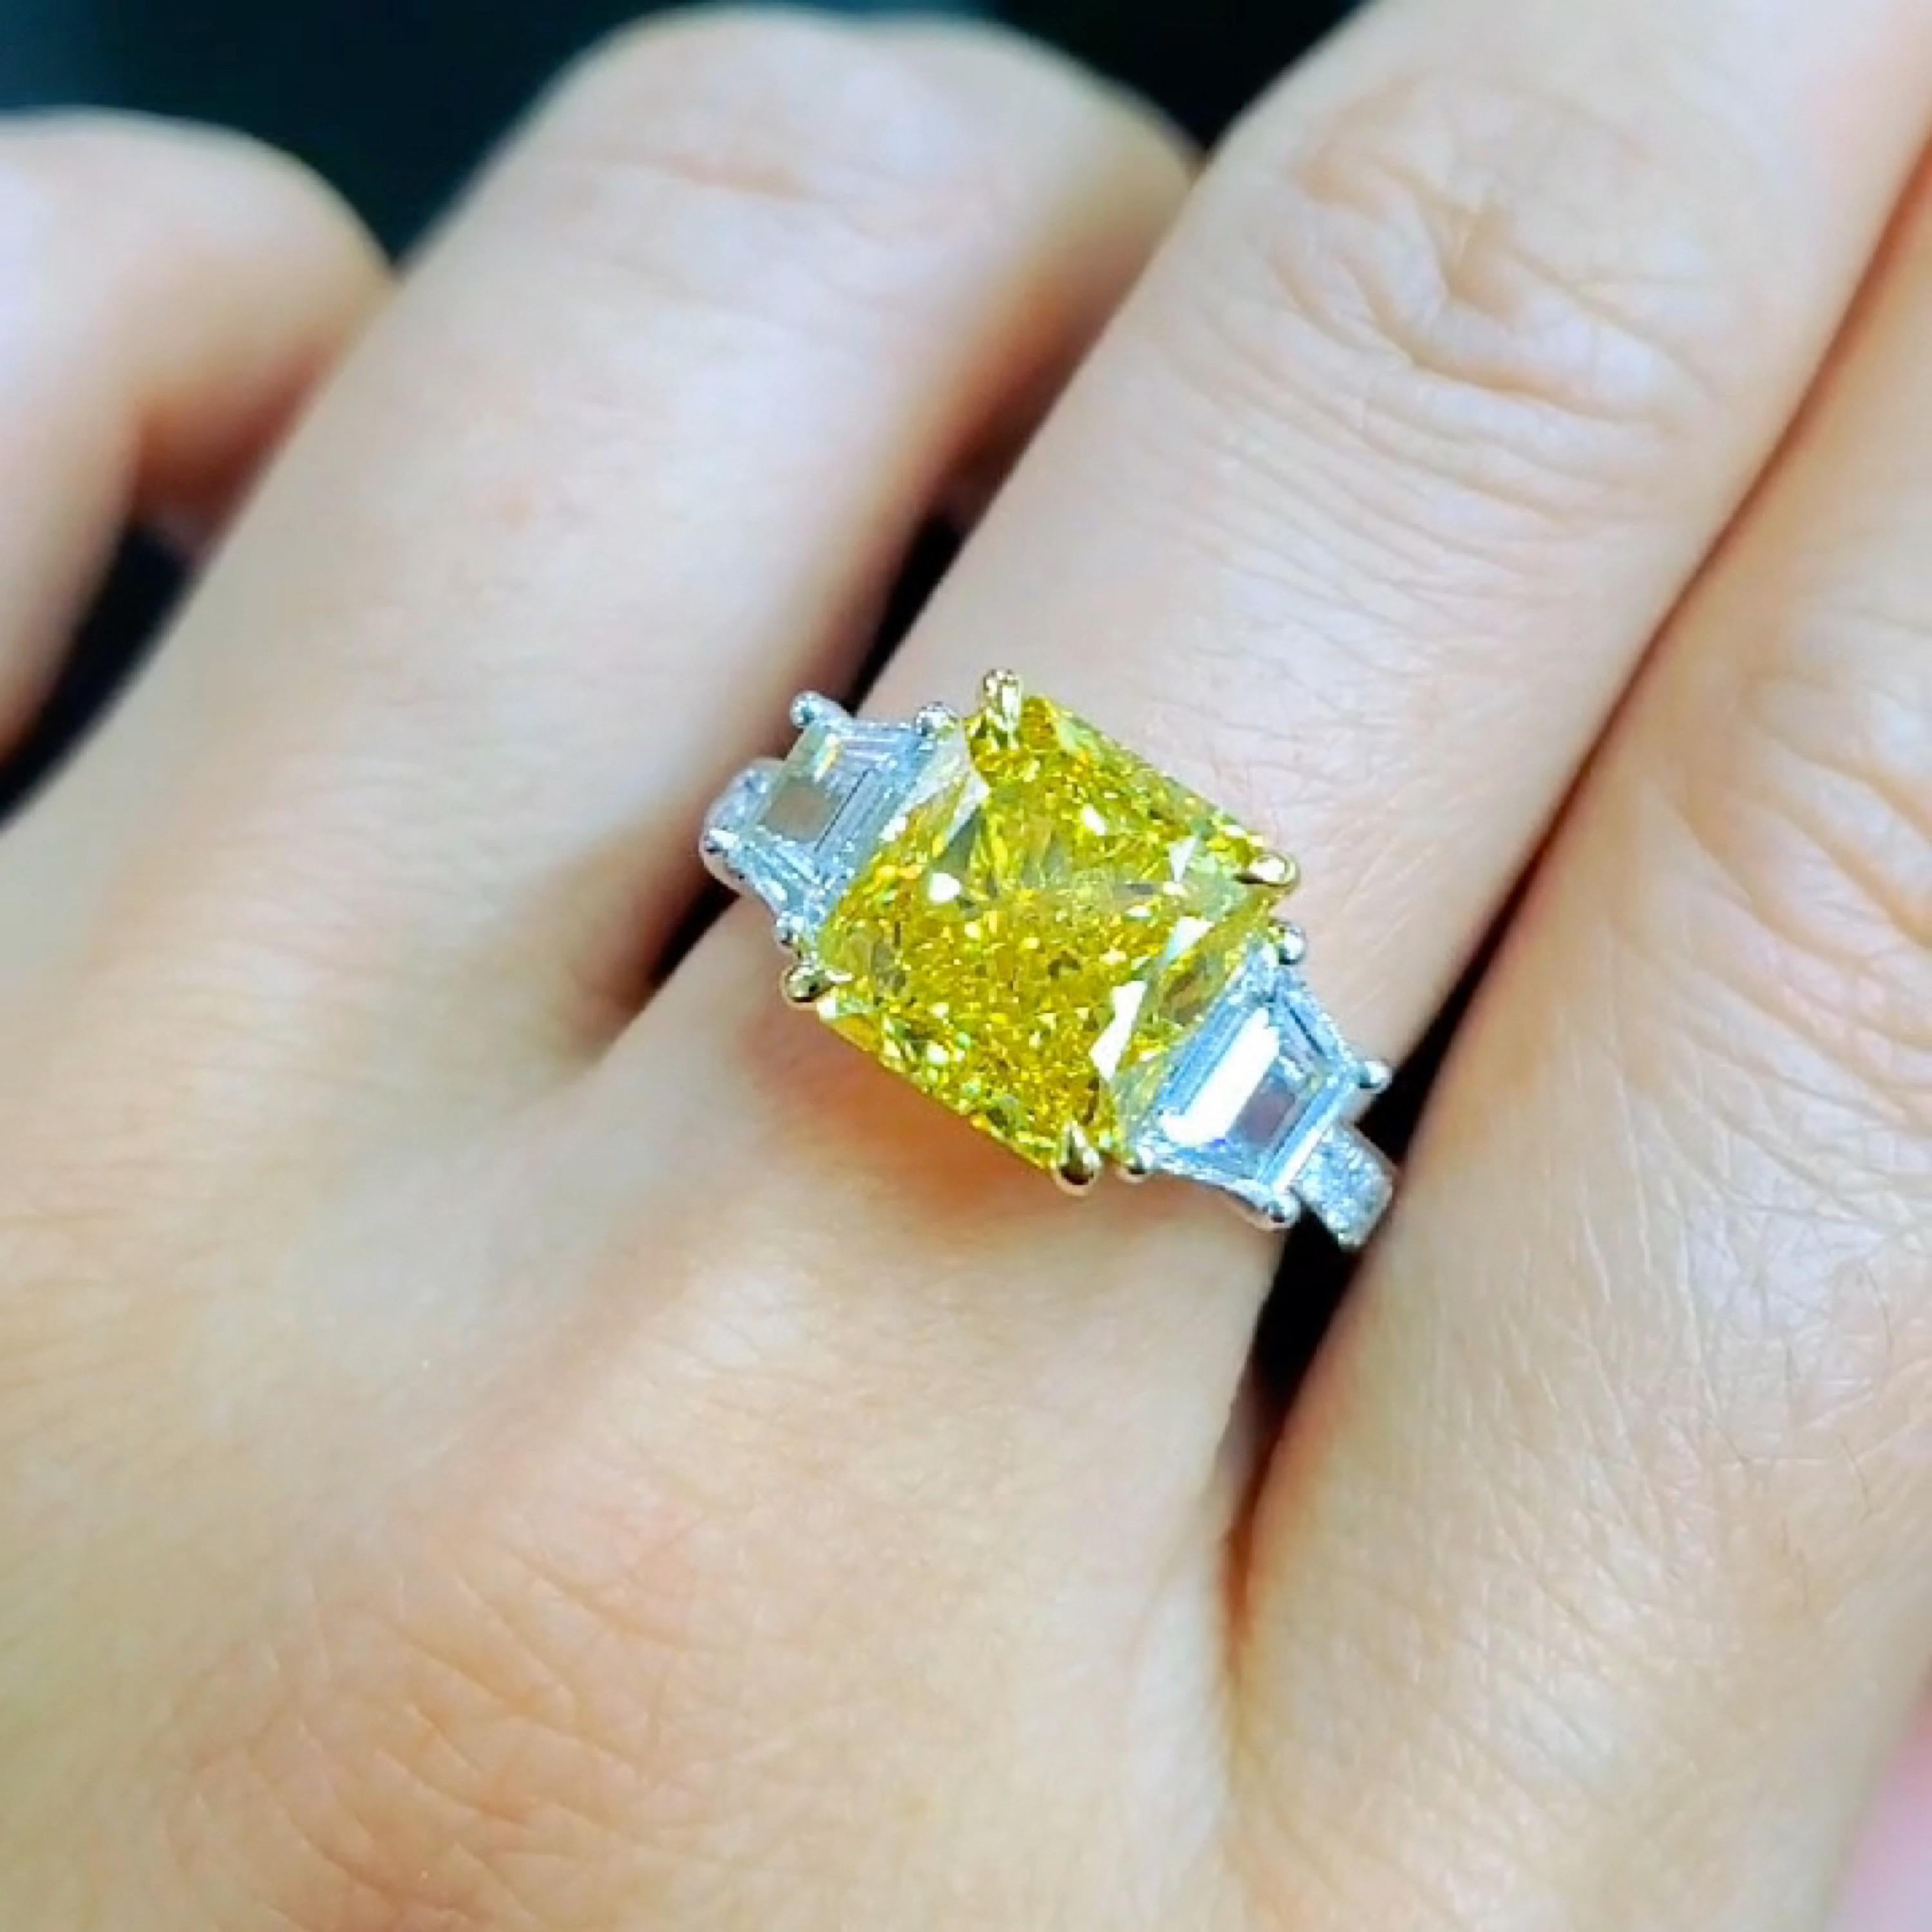 From Emilio Jewelry, a well known and respected wholesaler/dealer located on New York’s iconic Fifth Avenue, 
Featuring a center diamond of the highest color saturation, Fancy Vivid Yellow weighing just over 5.00 carats. 
The color is just